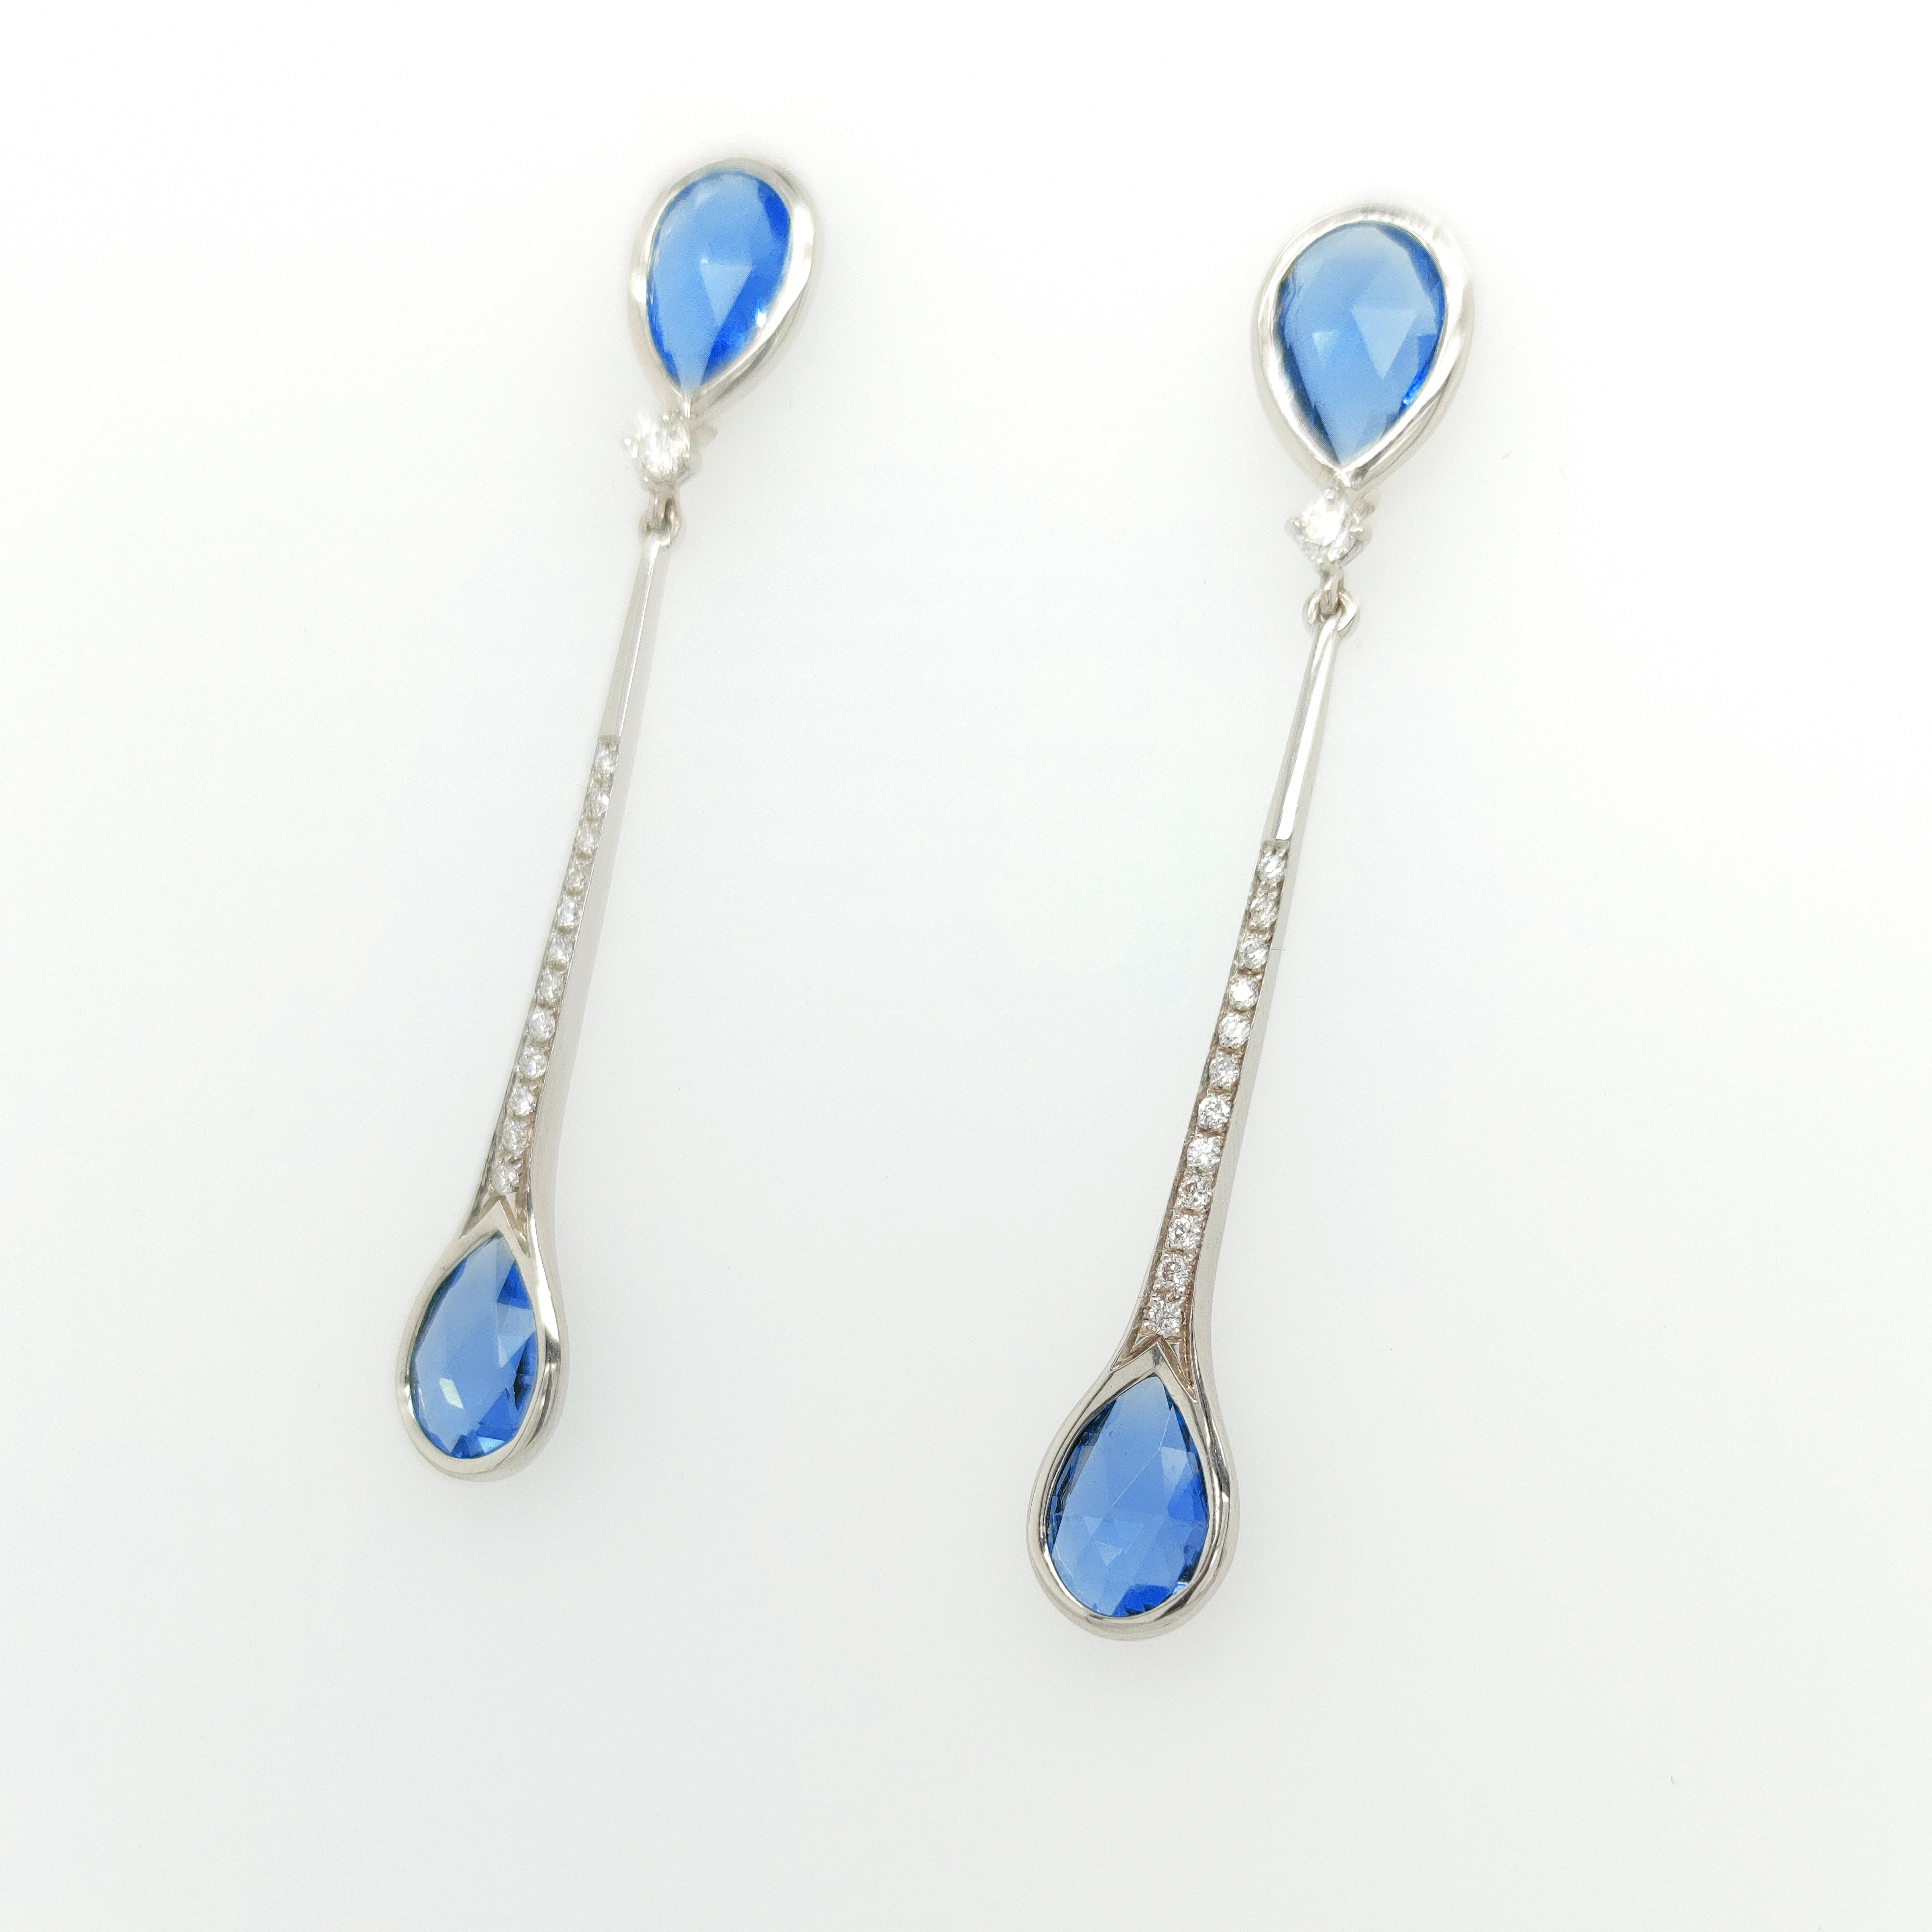 These fine chandelier earrings are exquisitely crafted with diamonds and blue topaz. The intricate design features delicate strands of diamonds forming a cascading chandelier shape, while the blue topaz gemstones add a beautiful pop of color. The